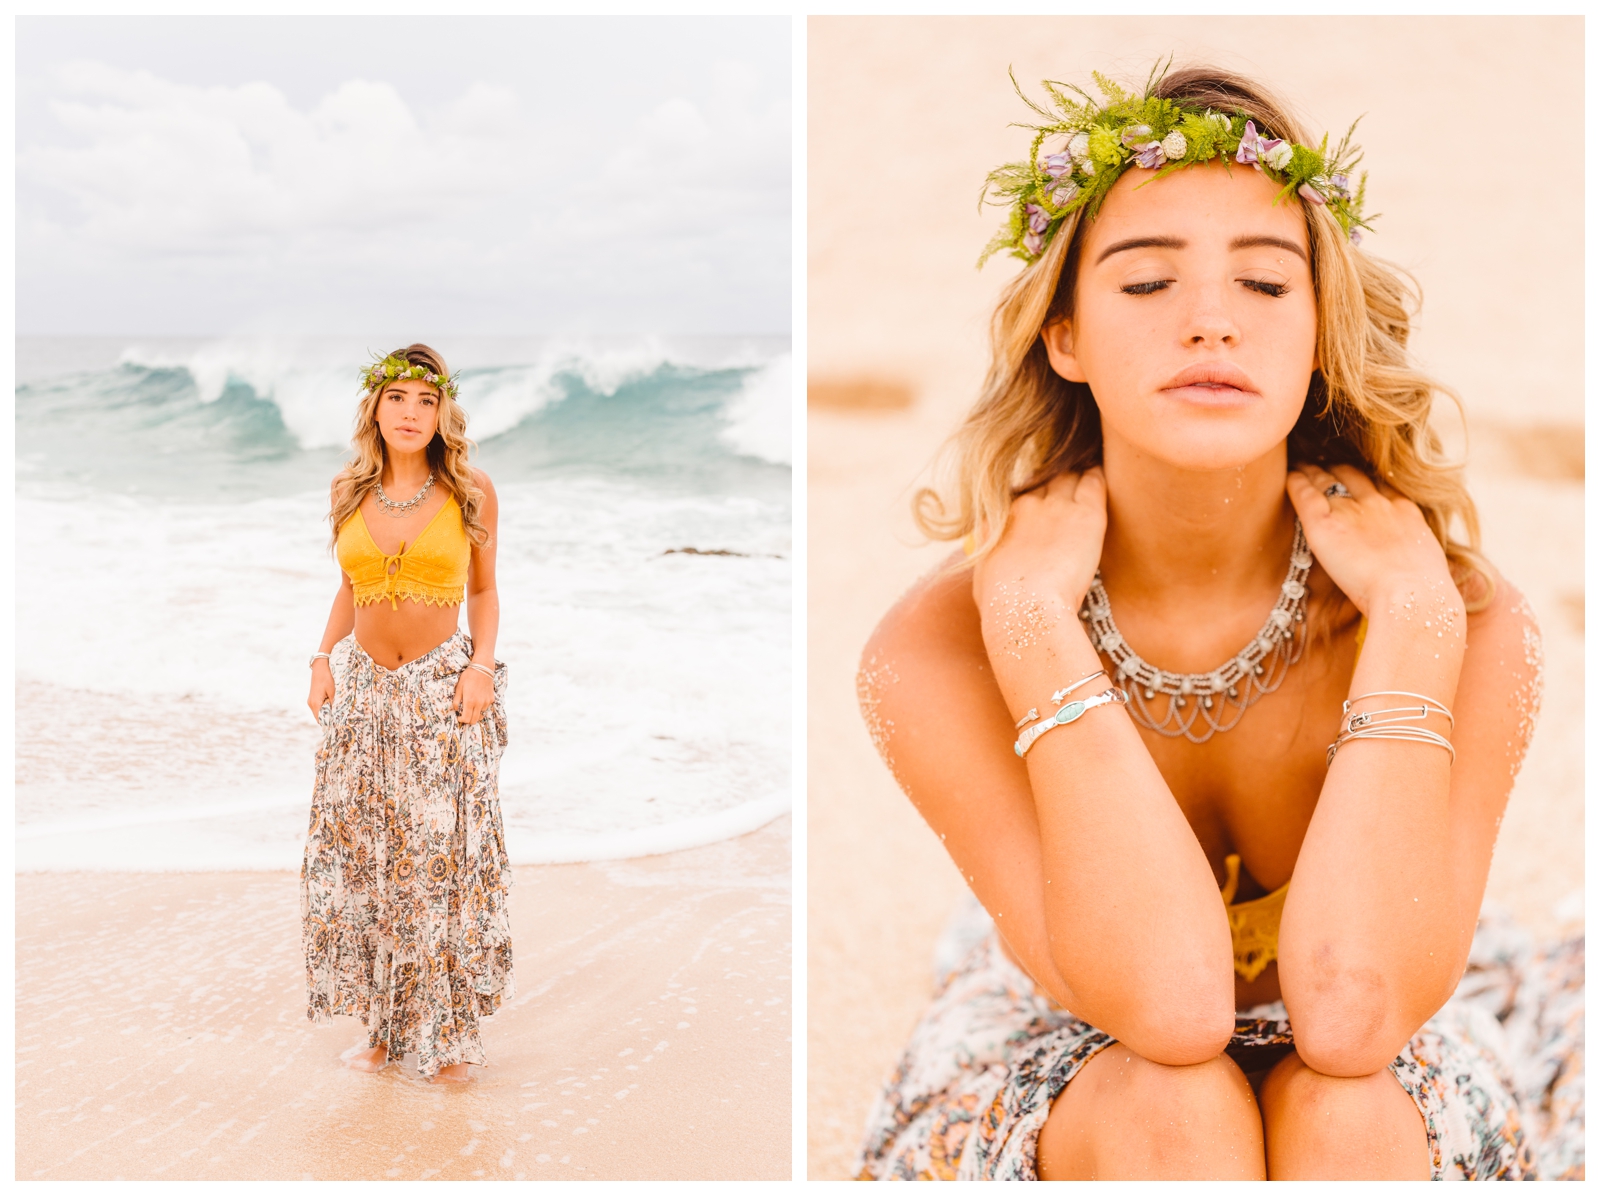 Bright Bohemian Inspired Beach Portrait Session - Oahu Hawaii - Brooke Michelle Photography